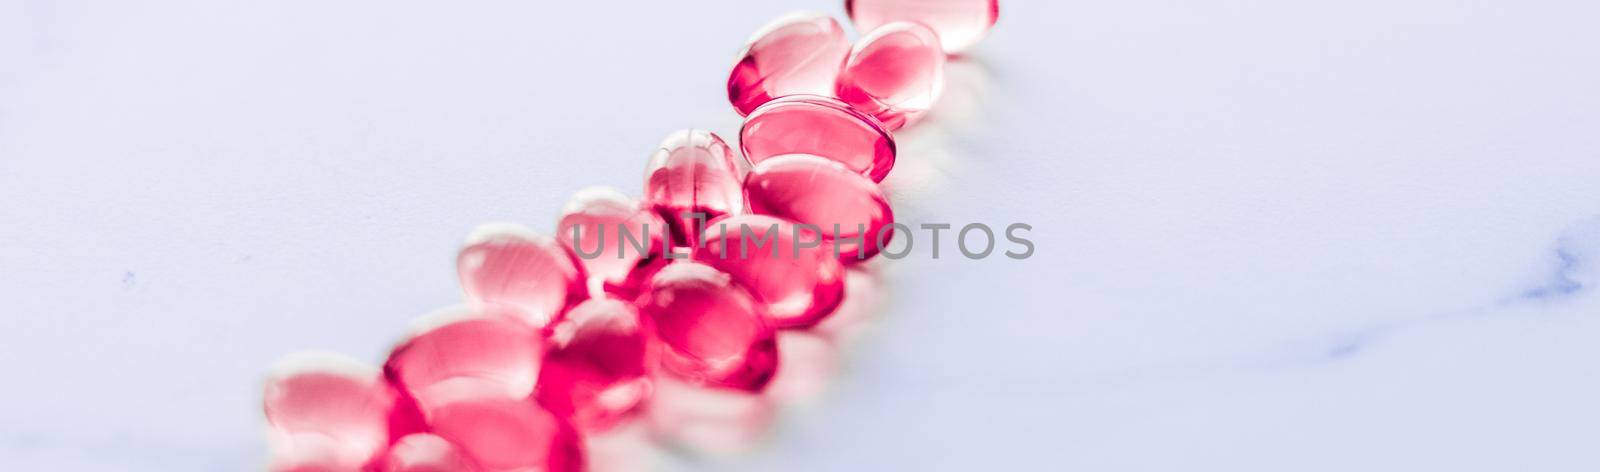 Pharmaceutical, branding and science concept - Red pills for healthy diet nutrition, supplements pill and probiotics capsules, healthcare and medicine as pharmacy and scientific research background